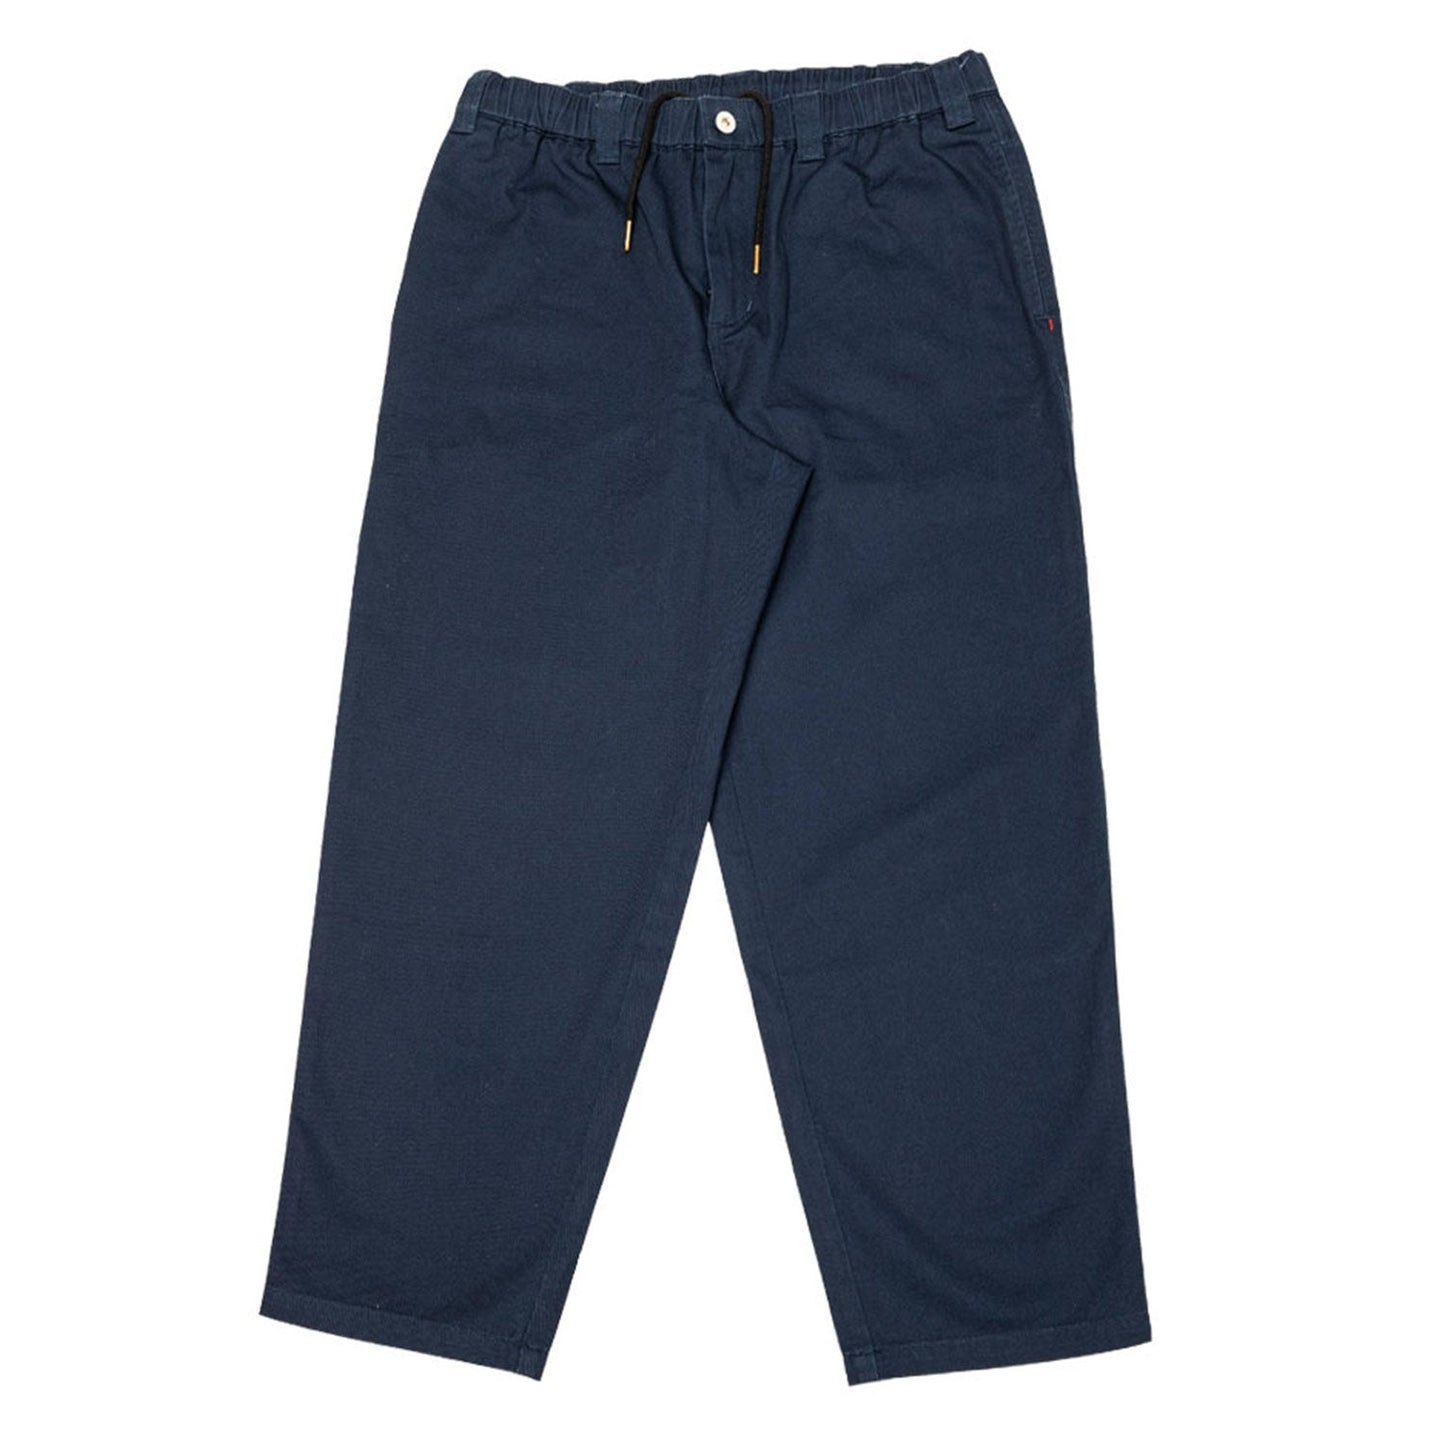 THEORIES SKATEBOARDS STAMP LOUNGE PANTS NAVY